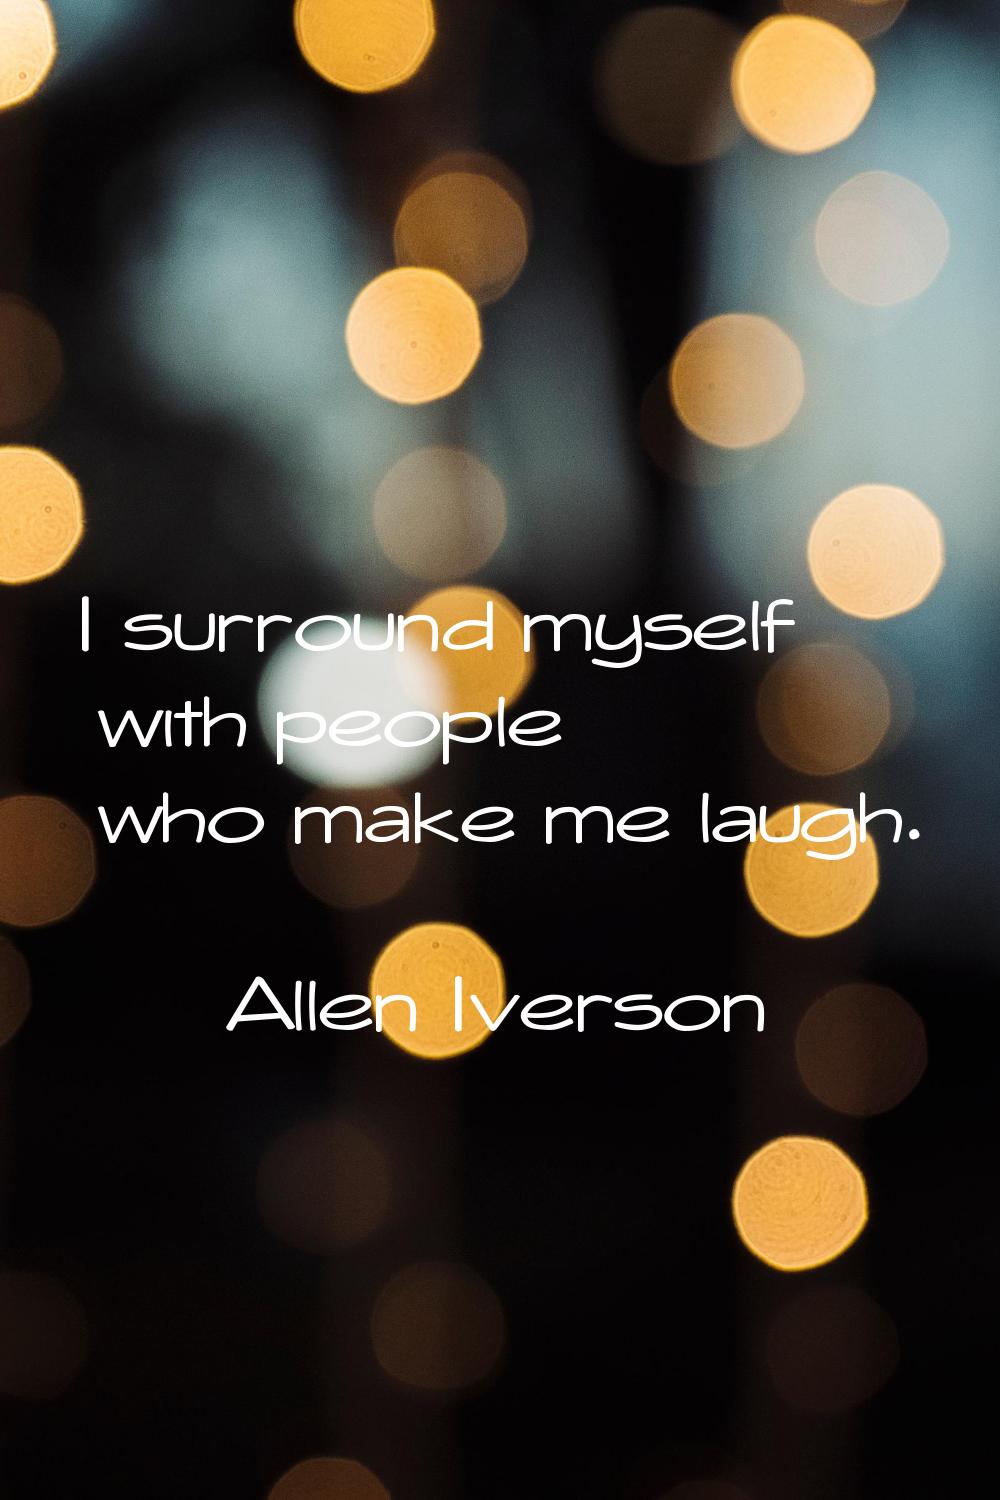 I surround myself with people who make me laugh.